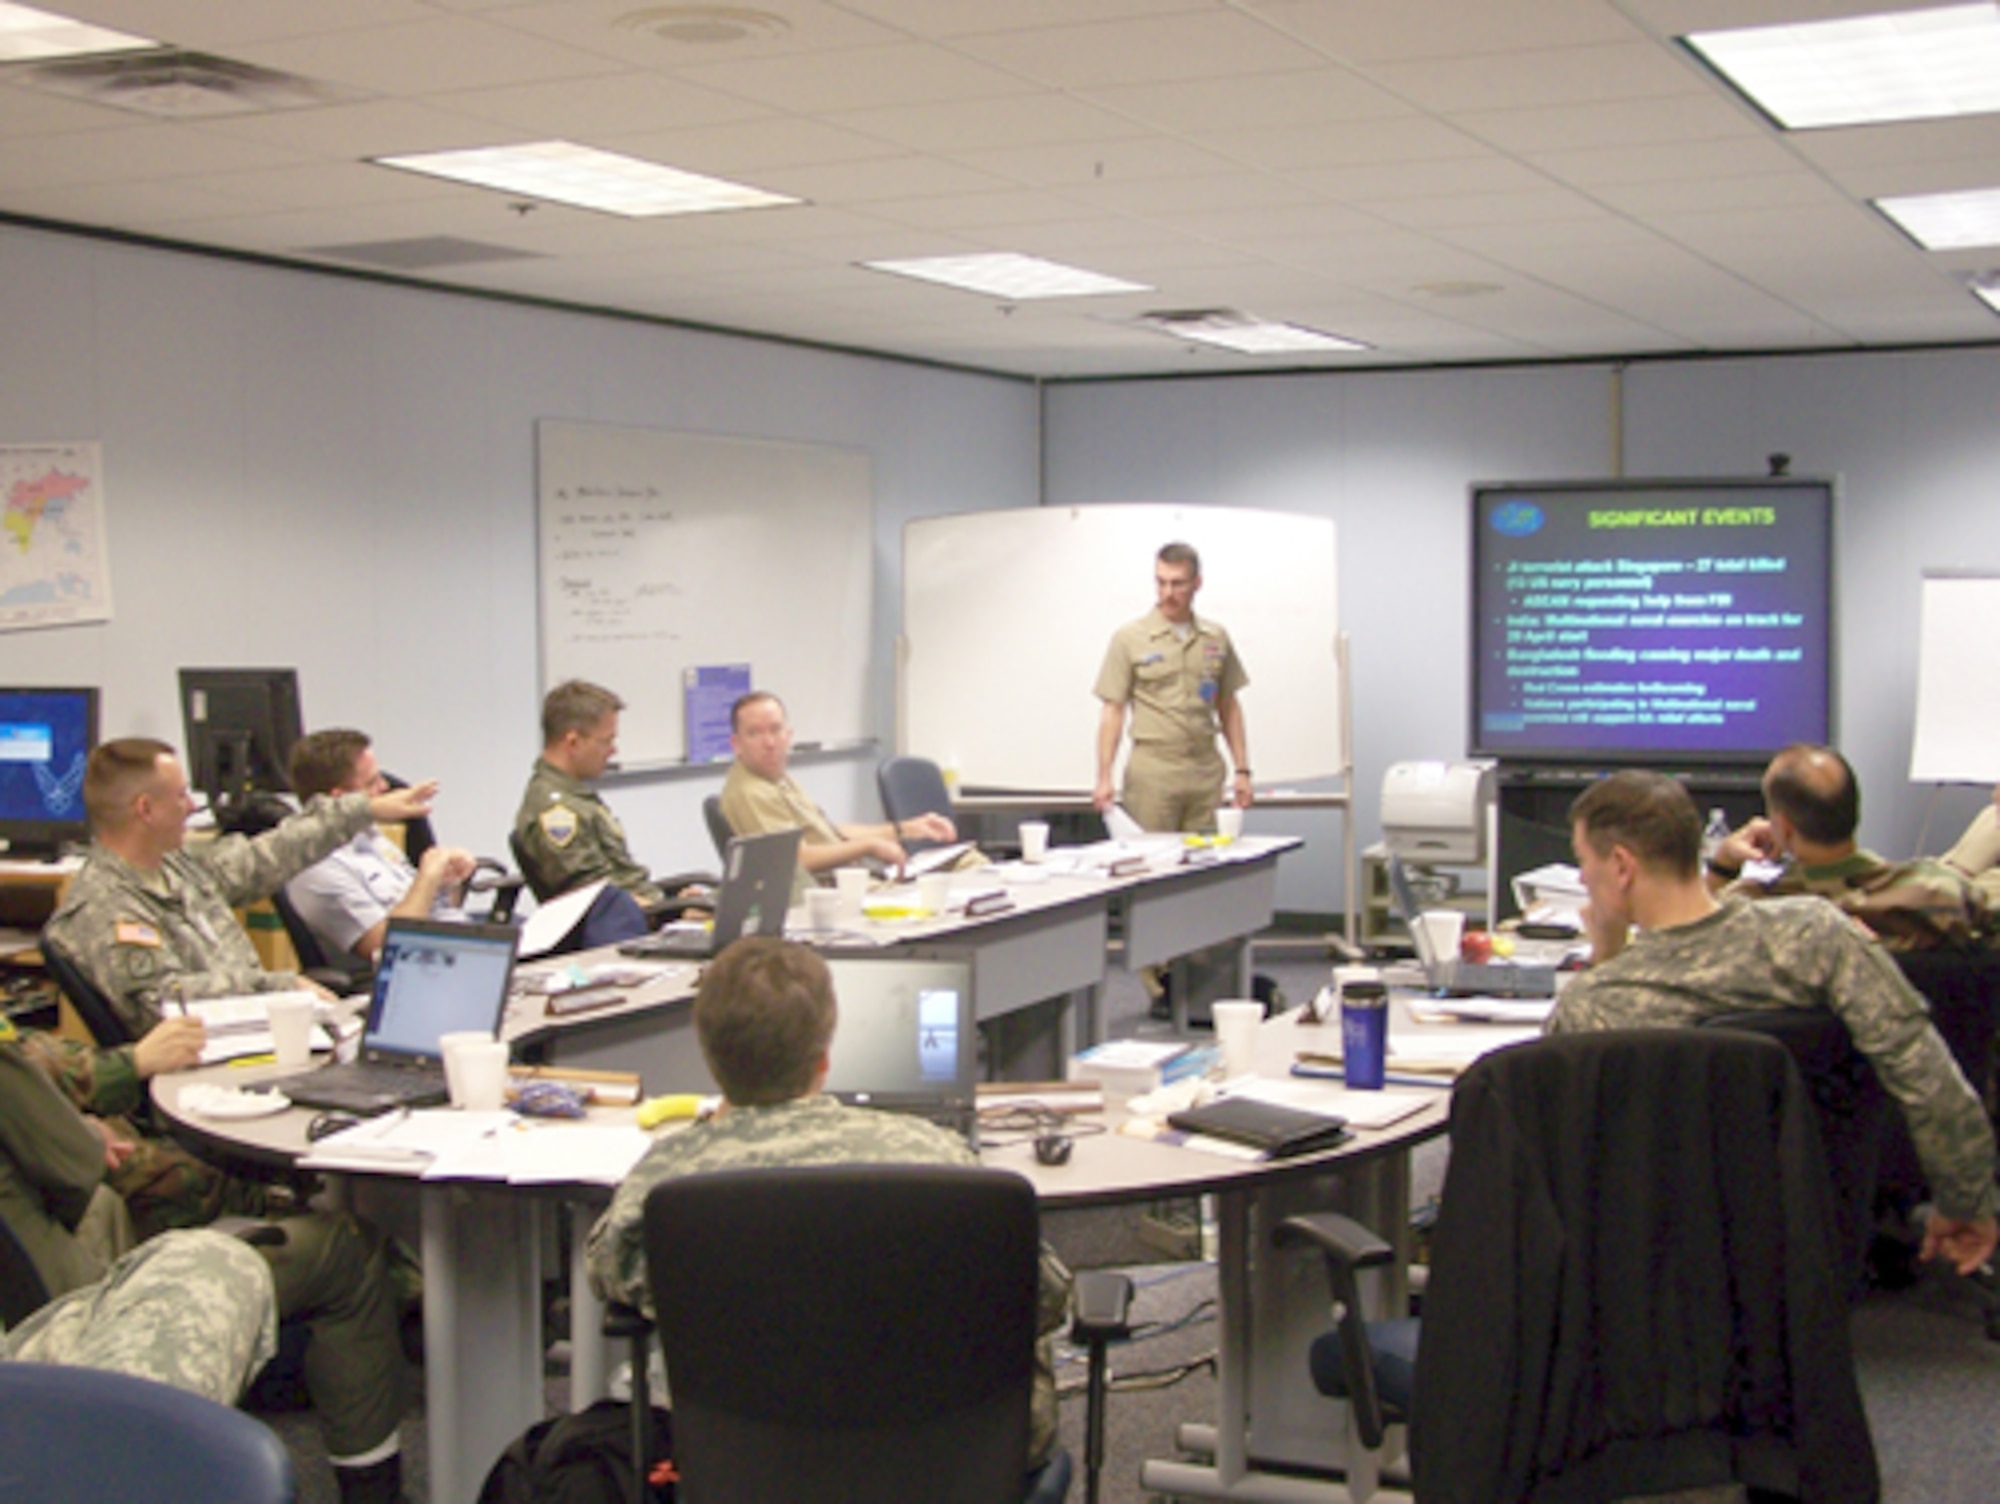 Students from five military senior-level colleges take part in seminar discussions as part of Joint Land, Air and Sea Strategic Exercise held annually at Maxwell. The exercise kicks off today. (Courtesy photo)